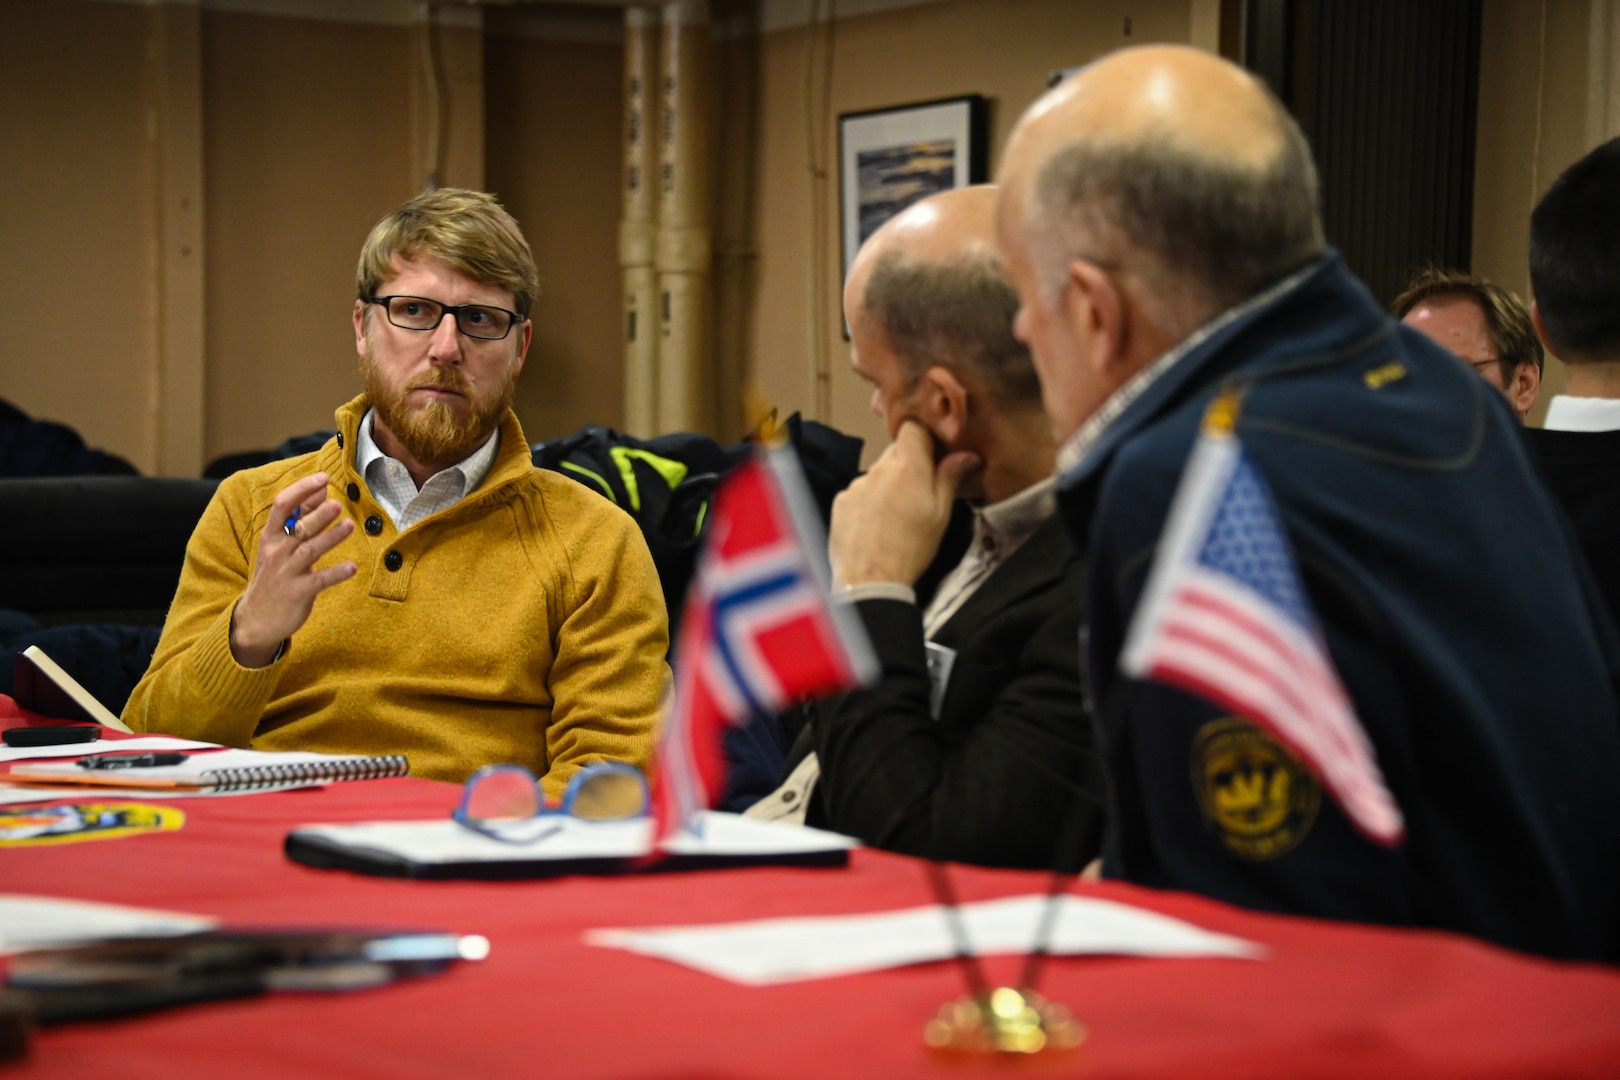 Adam VanDervort, American Presence. Post Officer, Michael Mayer, Norwegian Defence Research Establishment, and Harold Steen, Research Director for Norwegian Polar Institute, attend a science roundtable aboard the U.S. Coast Guard Cutter Healy (WAGB 20), while moored in Tromsø, Norway, Oct. 3, 2023. The science roundtable brought together researchers and operators from the U.S., Norway, and Canada to discuss best practices in search and rescue, environmental protection, and vessel safety and navigation in the Arctic. (U.S. Coast Guard photo by Senior Chief Charly Tautfest)